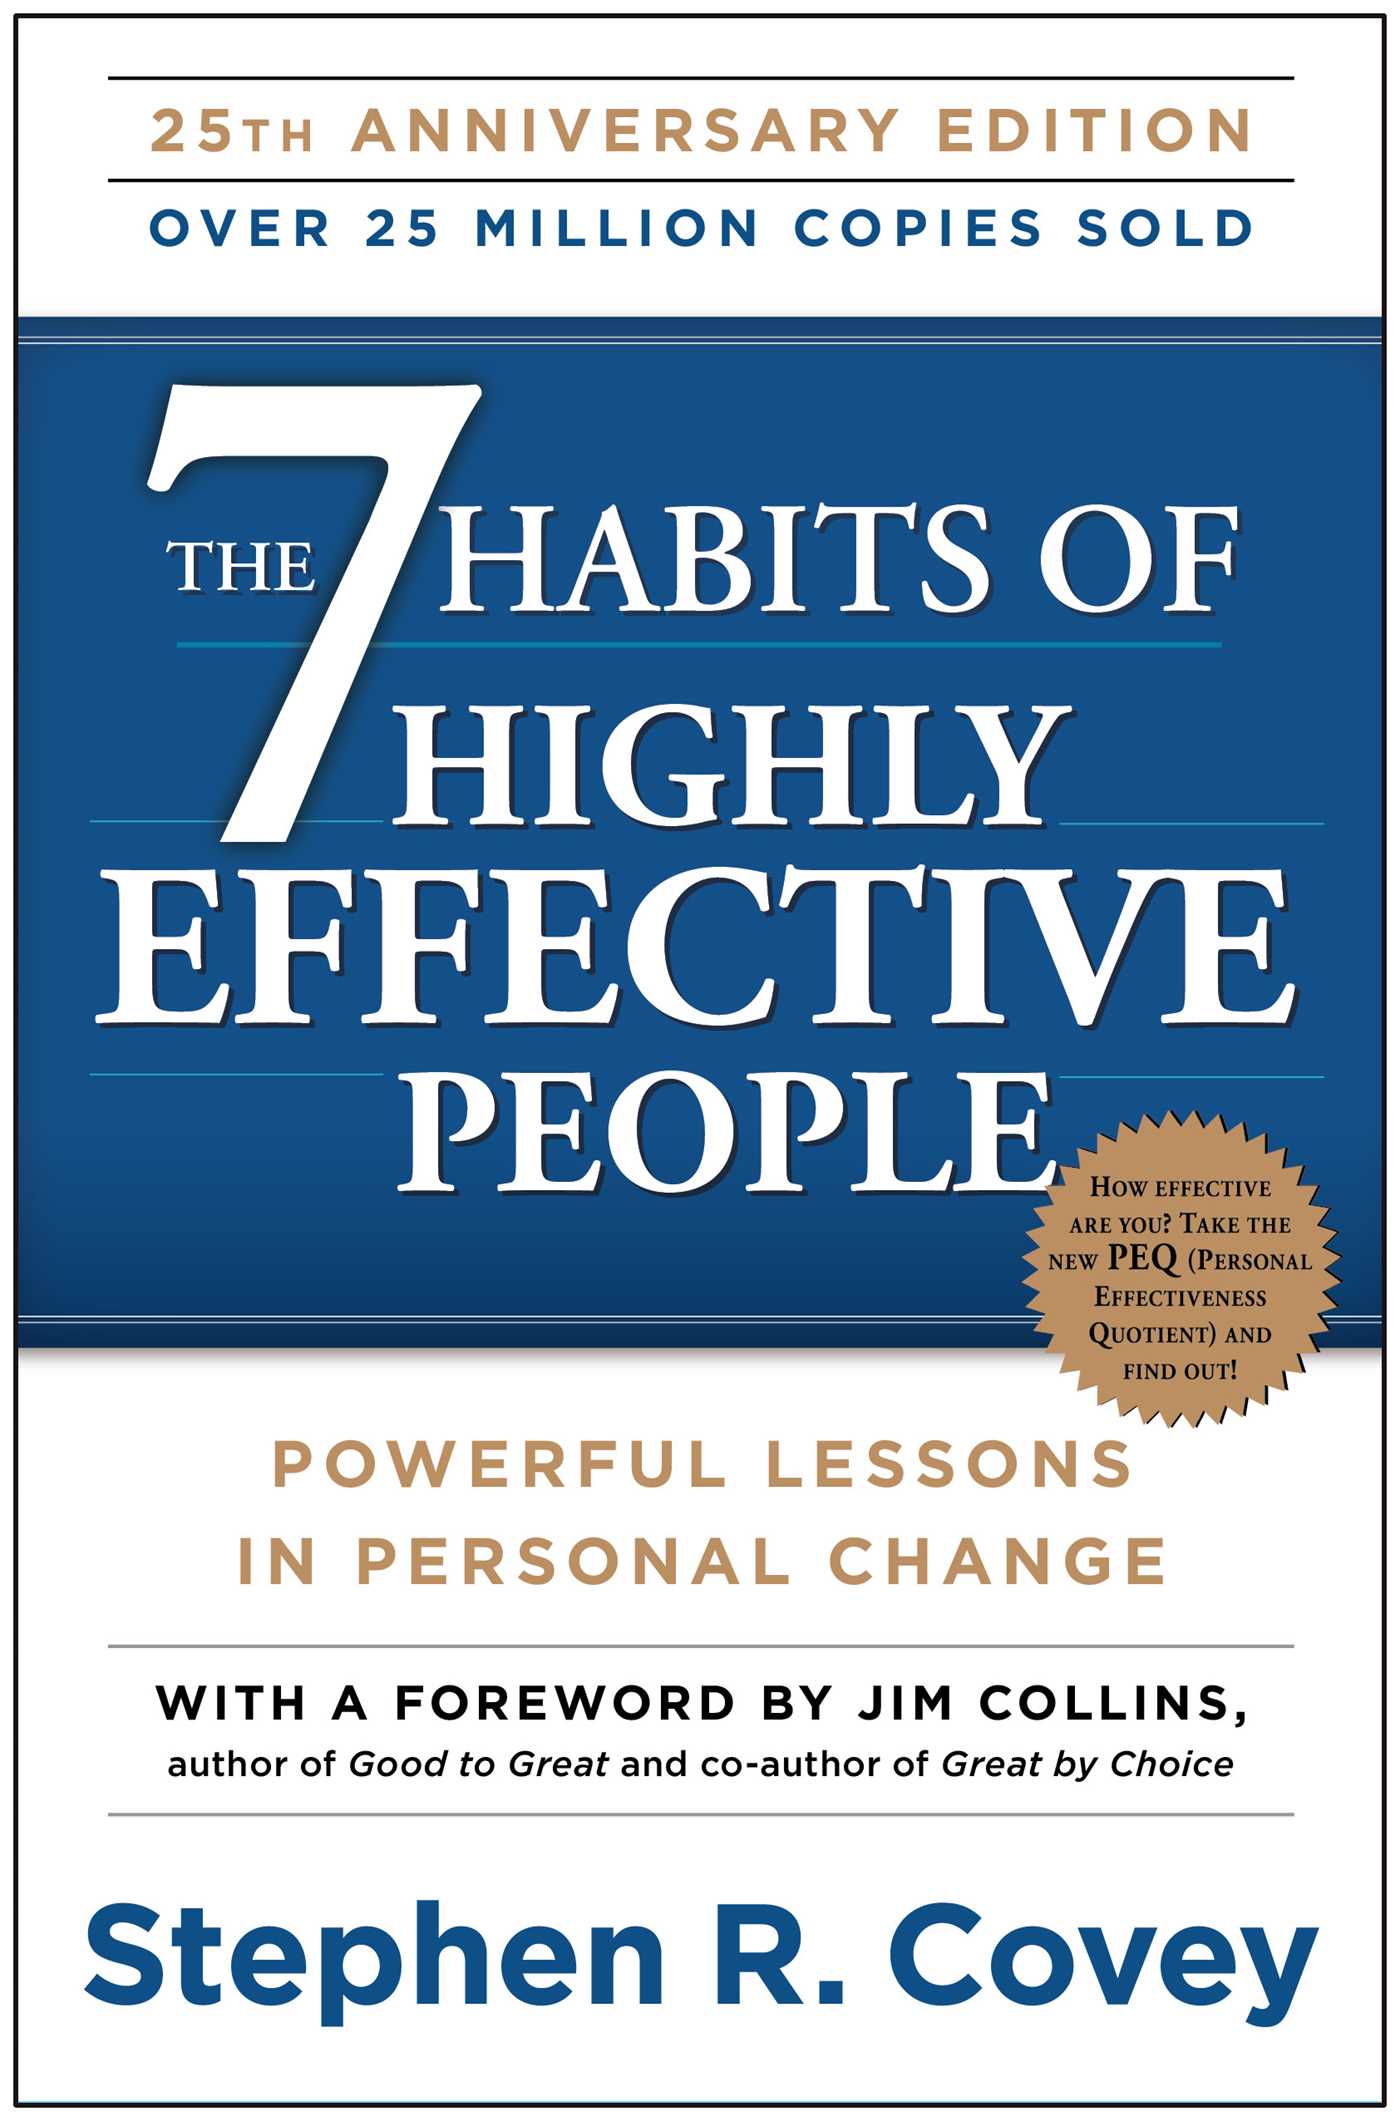 The 7 Habits of Highly Effective People: Powerful Lessons in Personal Change - Paperback - image 2 of 2